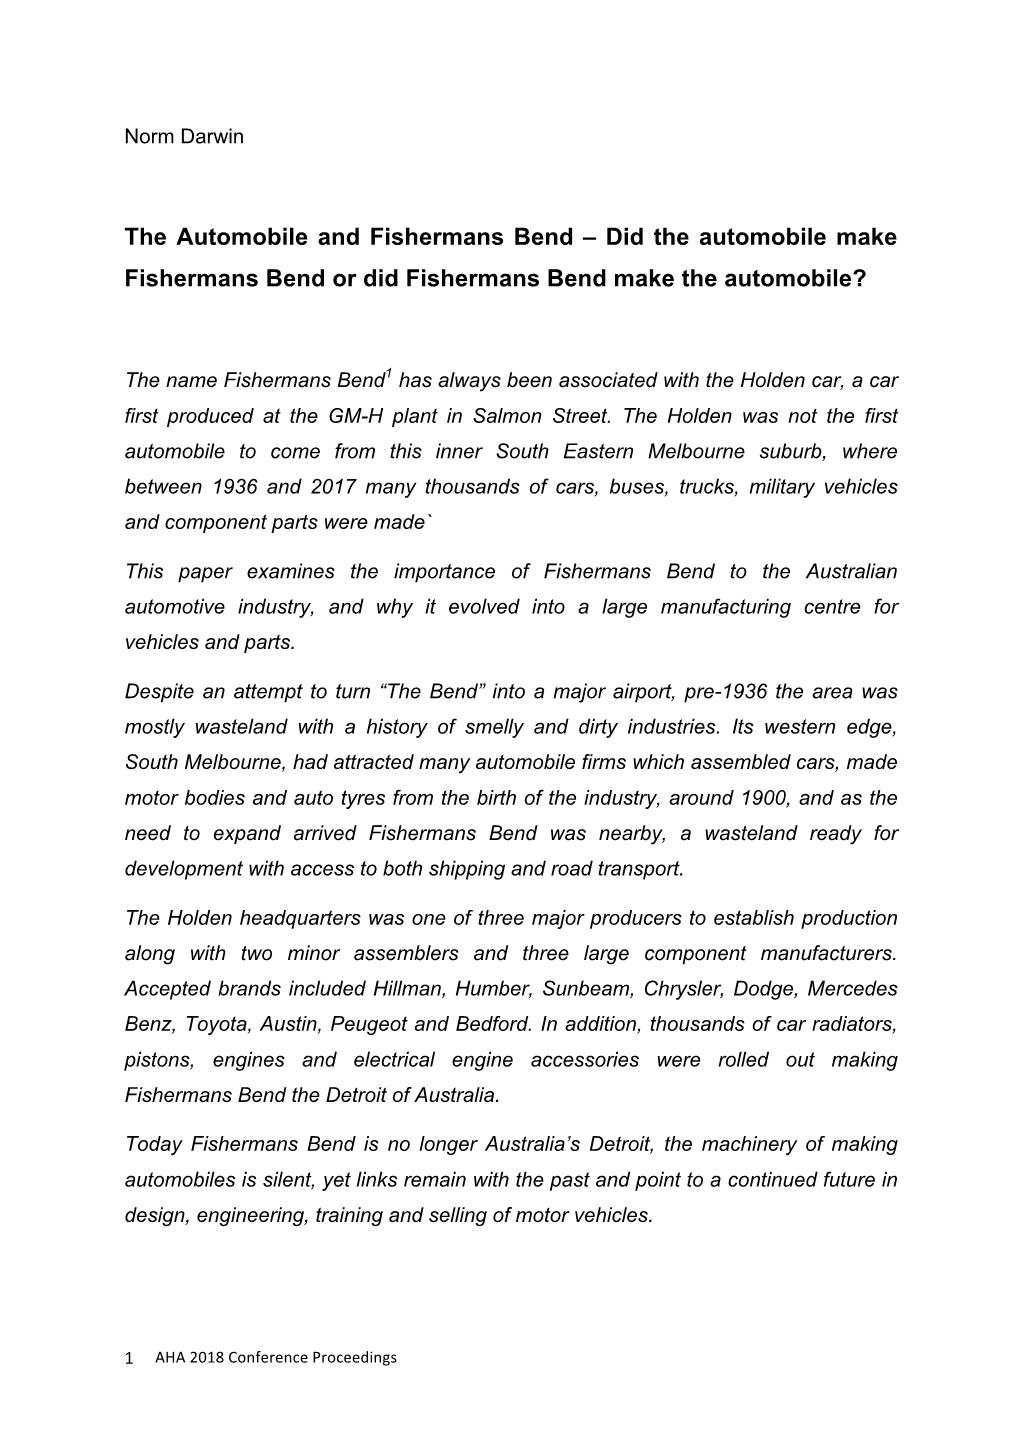 The Automobile and Fishermans Bend – Did the Automobile Make Fishermans Bend Or Did Fishermans Bend Make the Automobile?